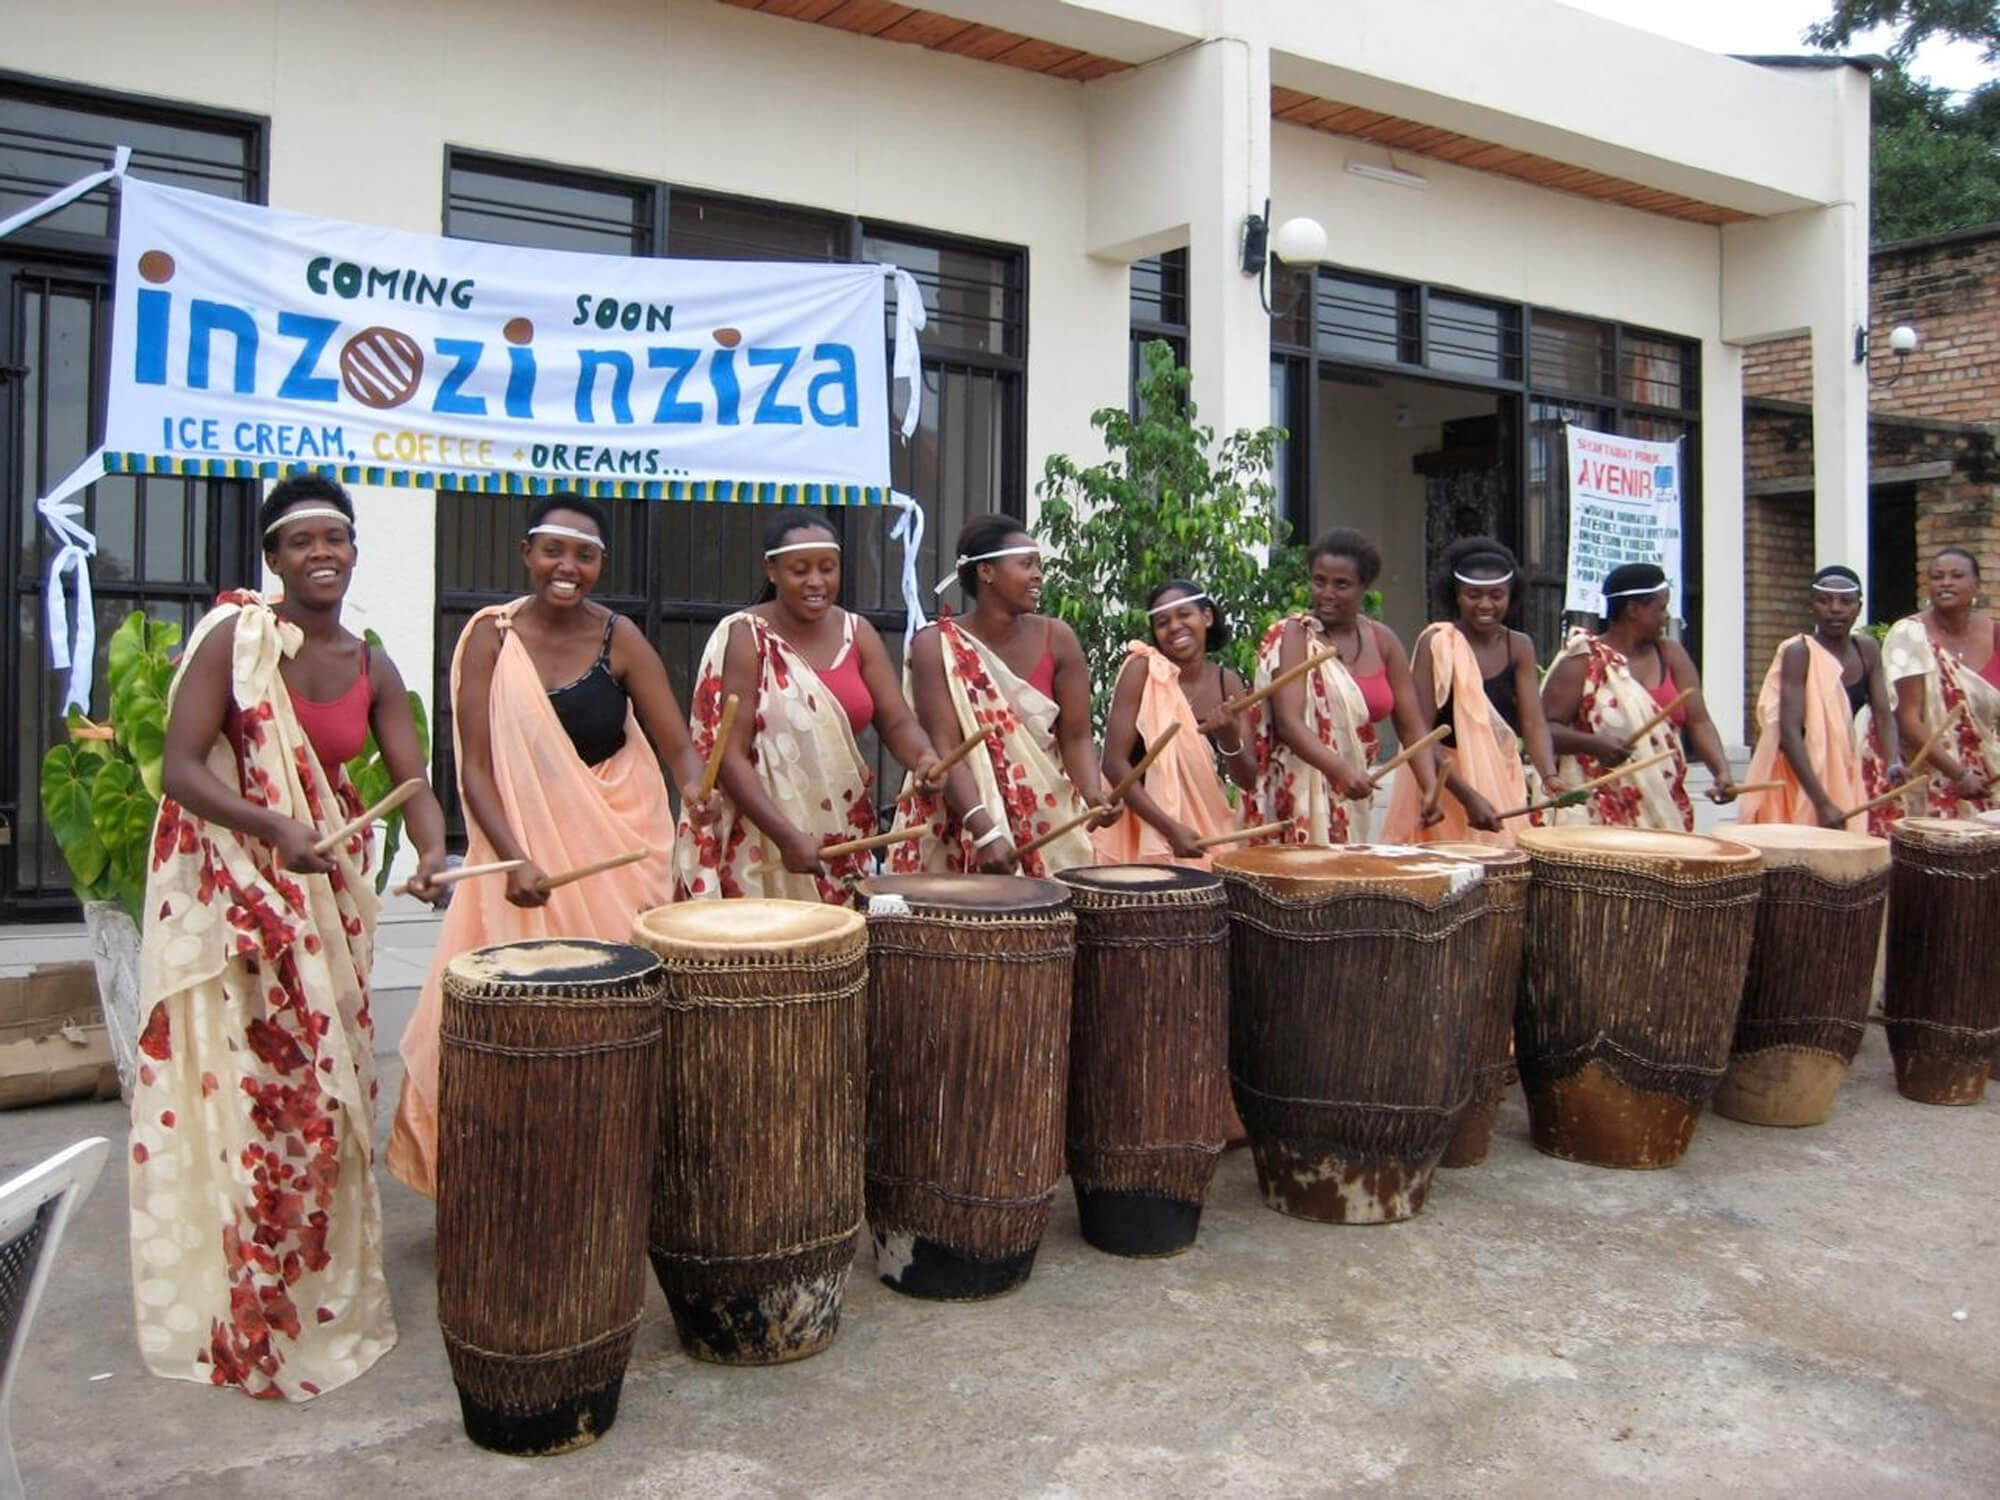 Still from Sweet Dreams. A line of eight women faces the camera. They are smiling and playing stomach-height wooden drums. They stand shoulder to shoulder in front of a white banner that reads, "Coming Soon Zozi nziza: cream, coffee, dreams".